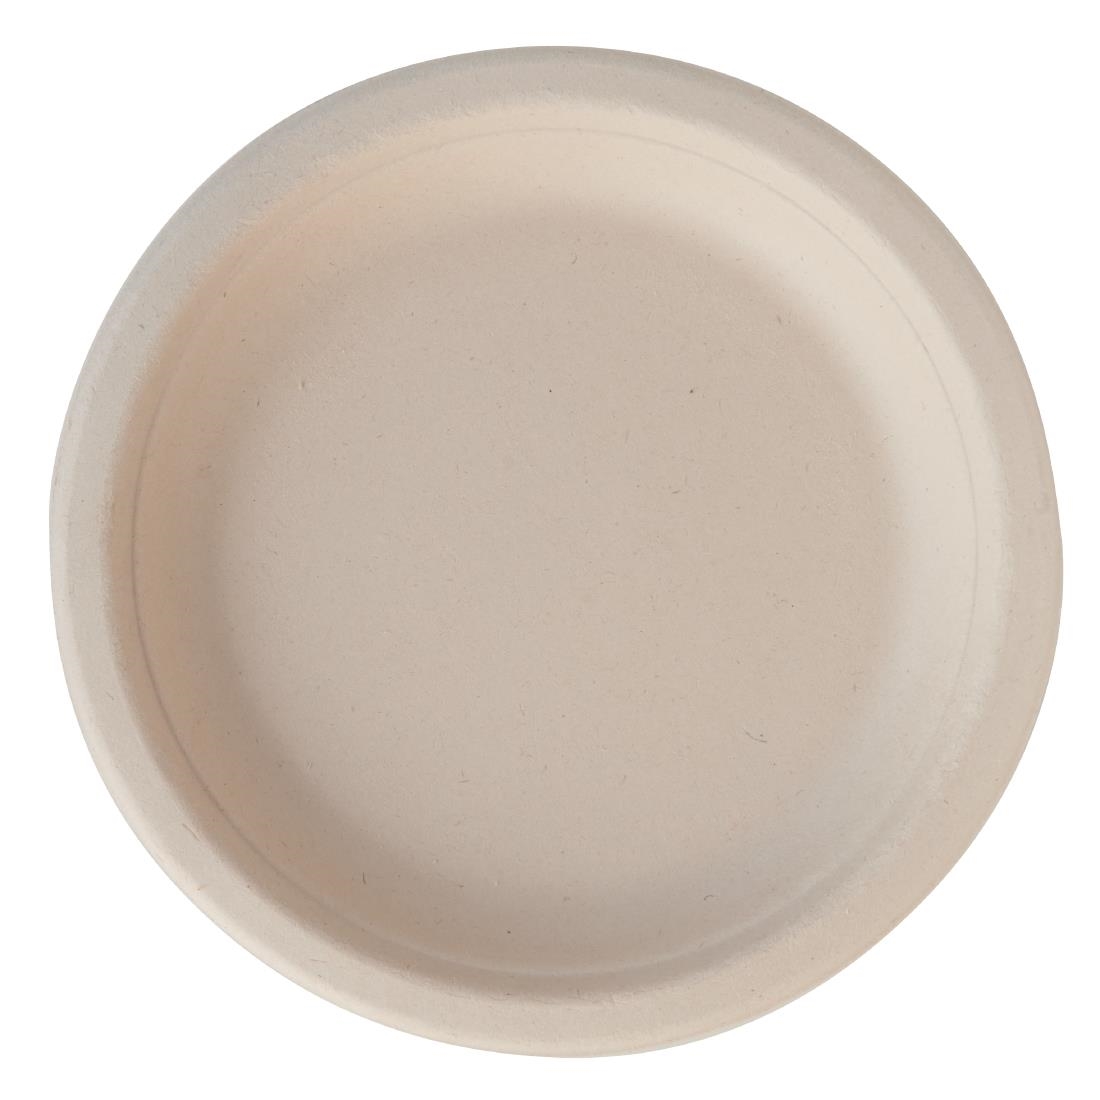 eGreen Eco-Fibre Compostable Wheat Round Plates 180mm (Pack of 1000)